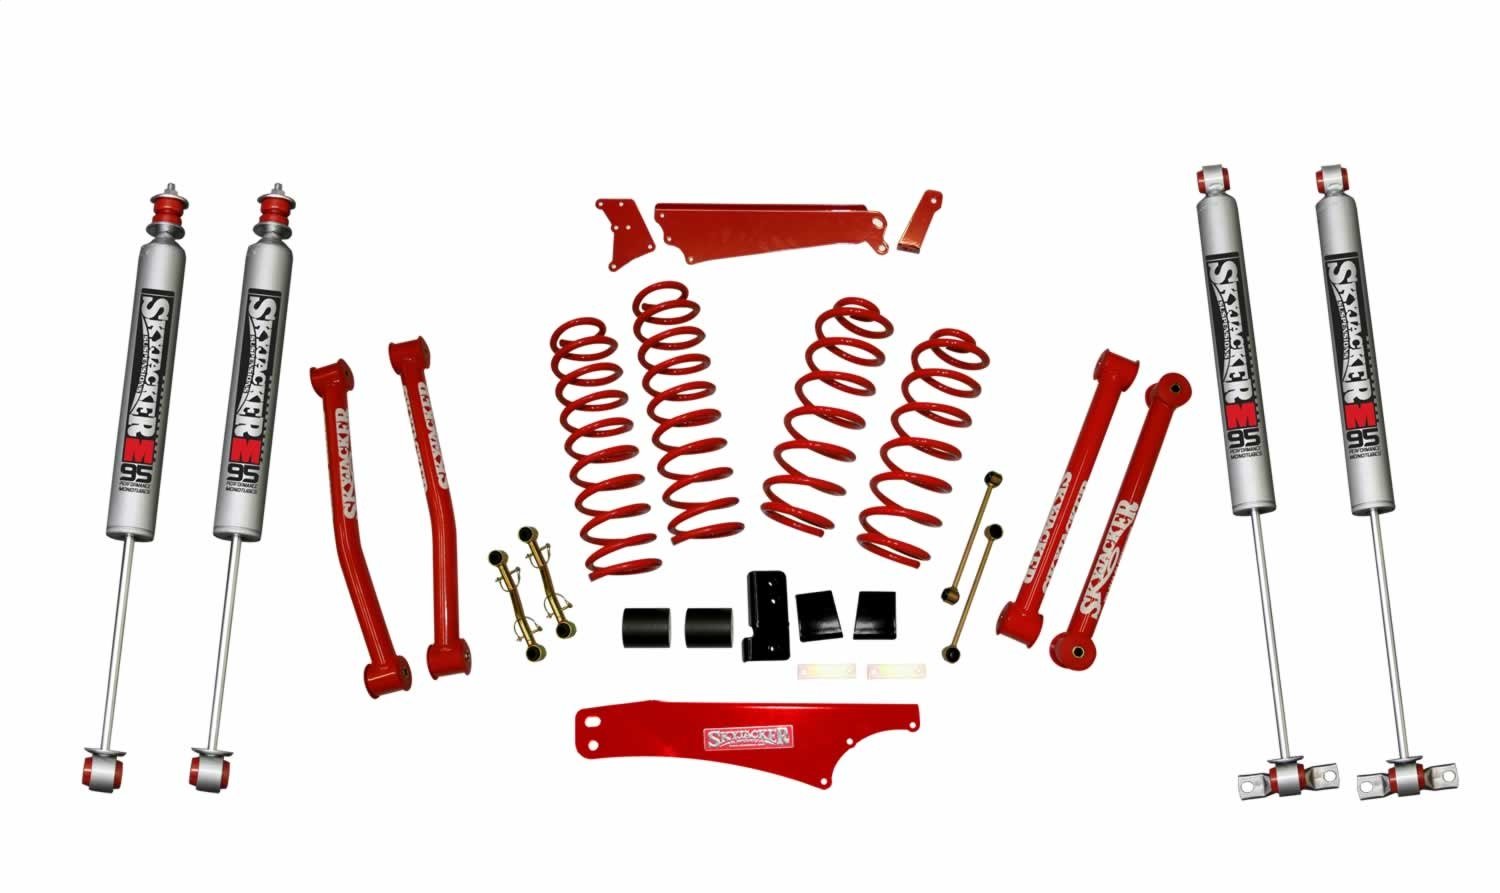 JK401KCR-M Front and Rear Suspension Lift Kit, Lift Amount: 4-5 in. Front/4-5 in. Rear